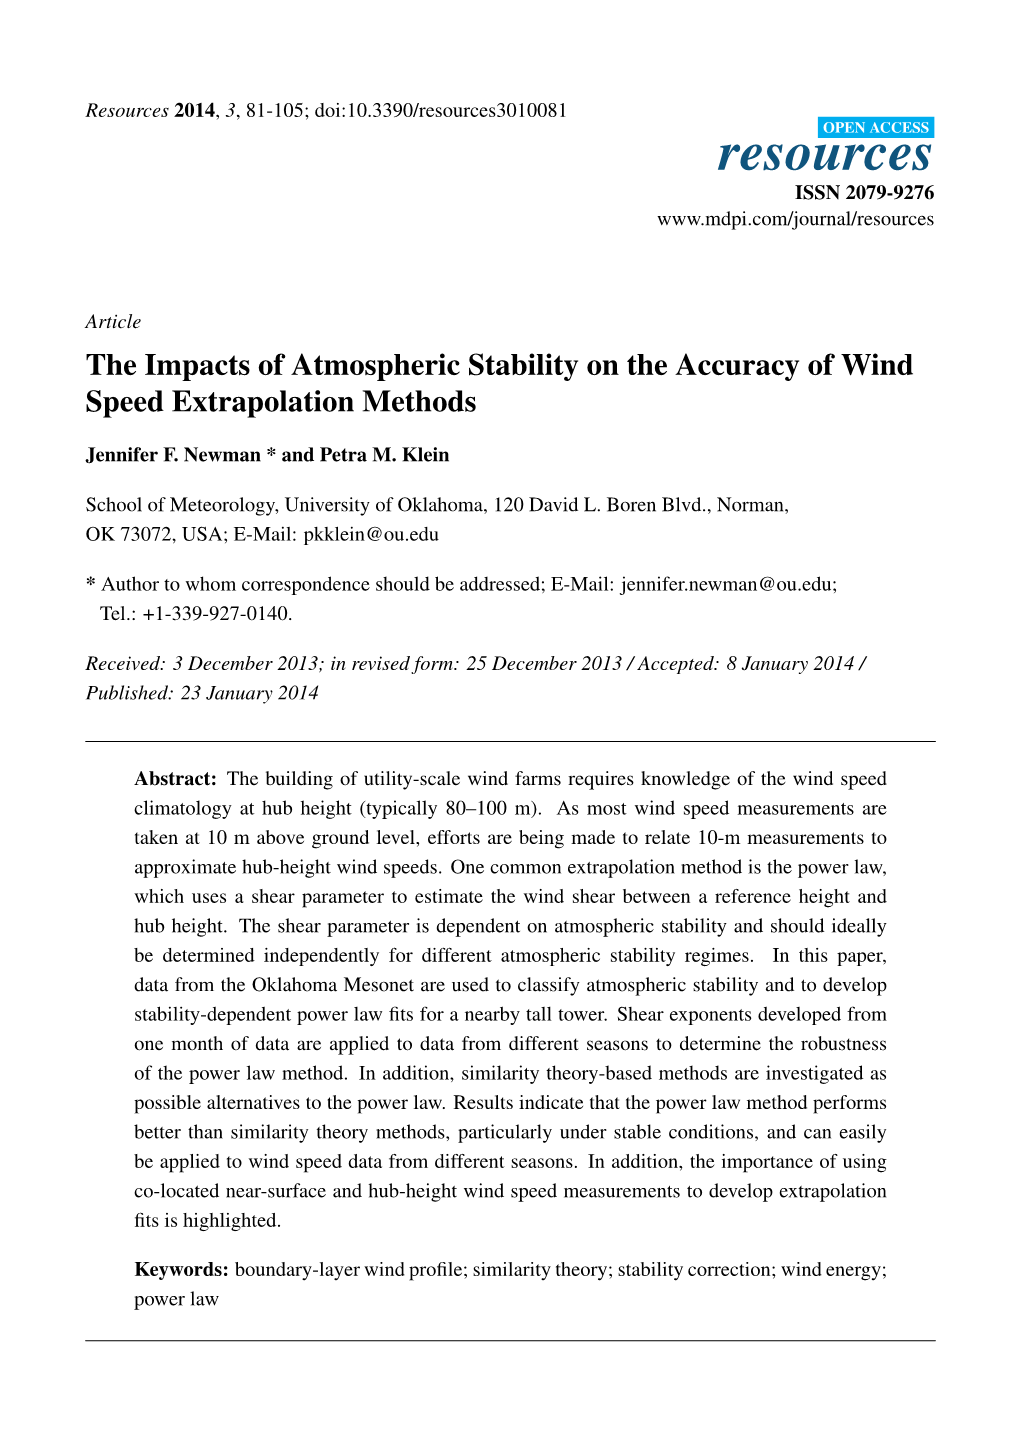 The Impacts of Atmospheric Stability on the Accuracy of Wind Speed Extrapolation Methods